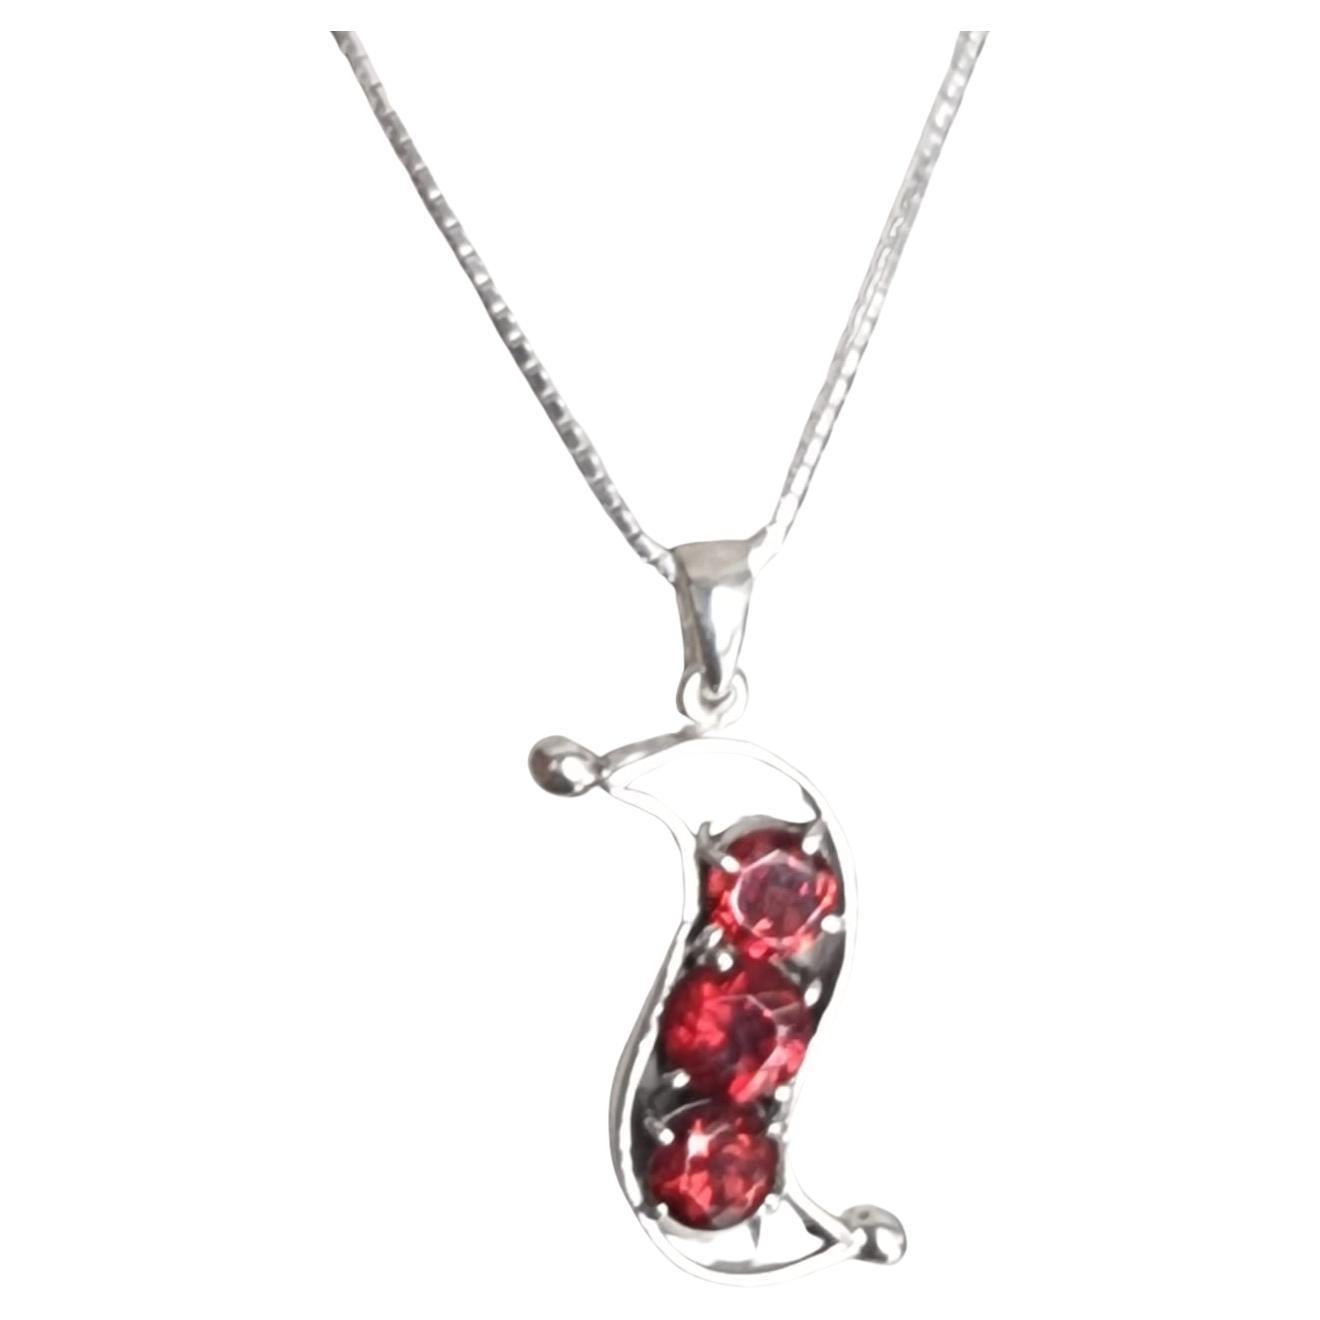 Introducing our stunning 3 Stone Red Garnet Pod Pendant Necklace—a mesmerizing blend of elegance and nature-inspired design. Crafted with meticulous attention to detail, this exquisite necklace features three round garnet gemstones, each weighing